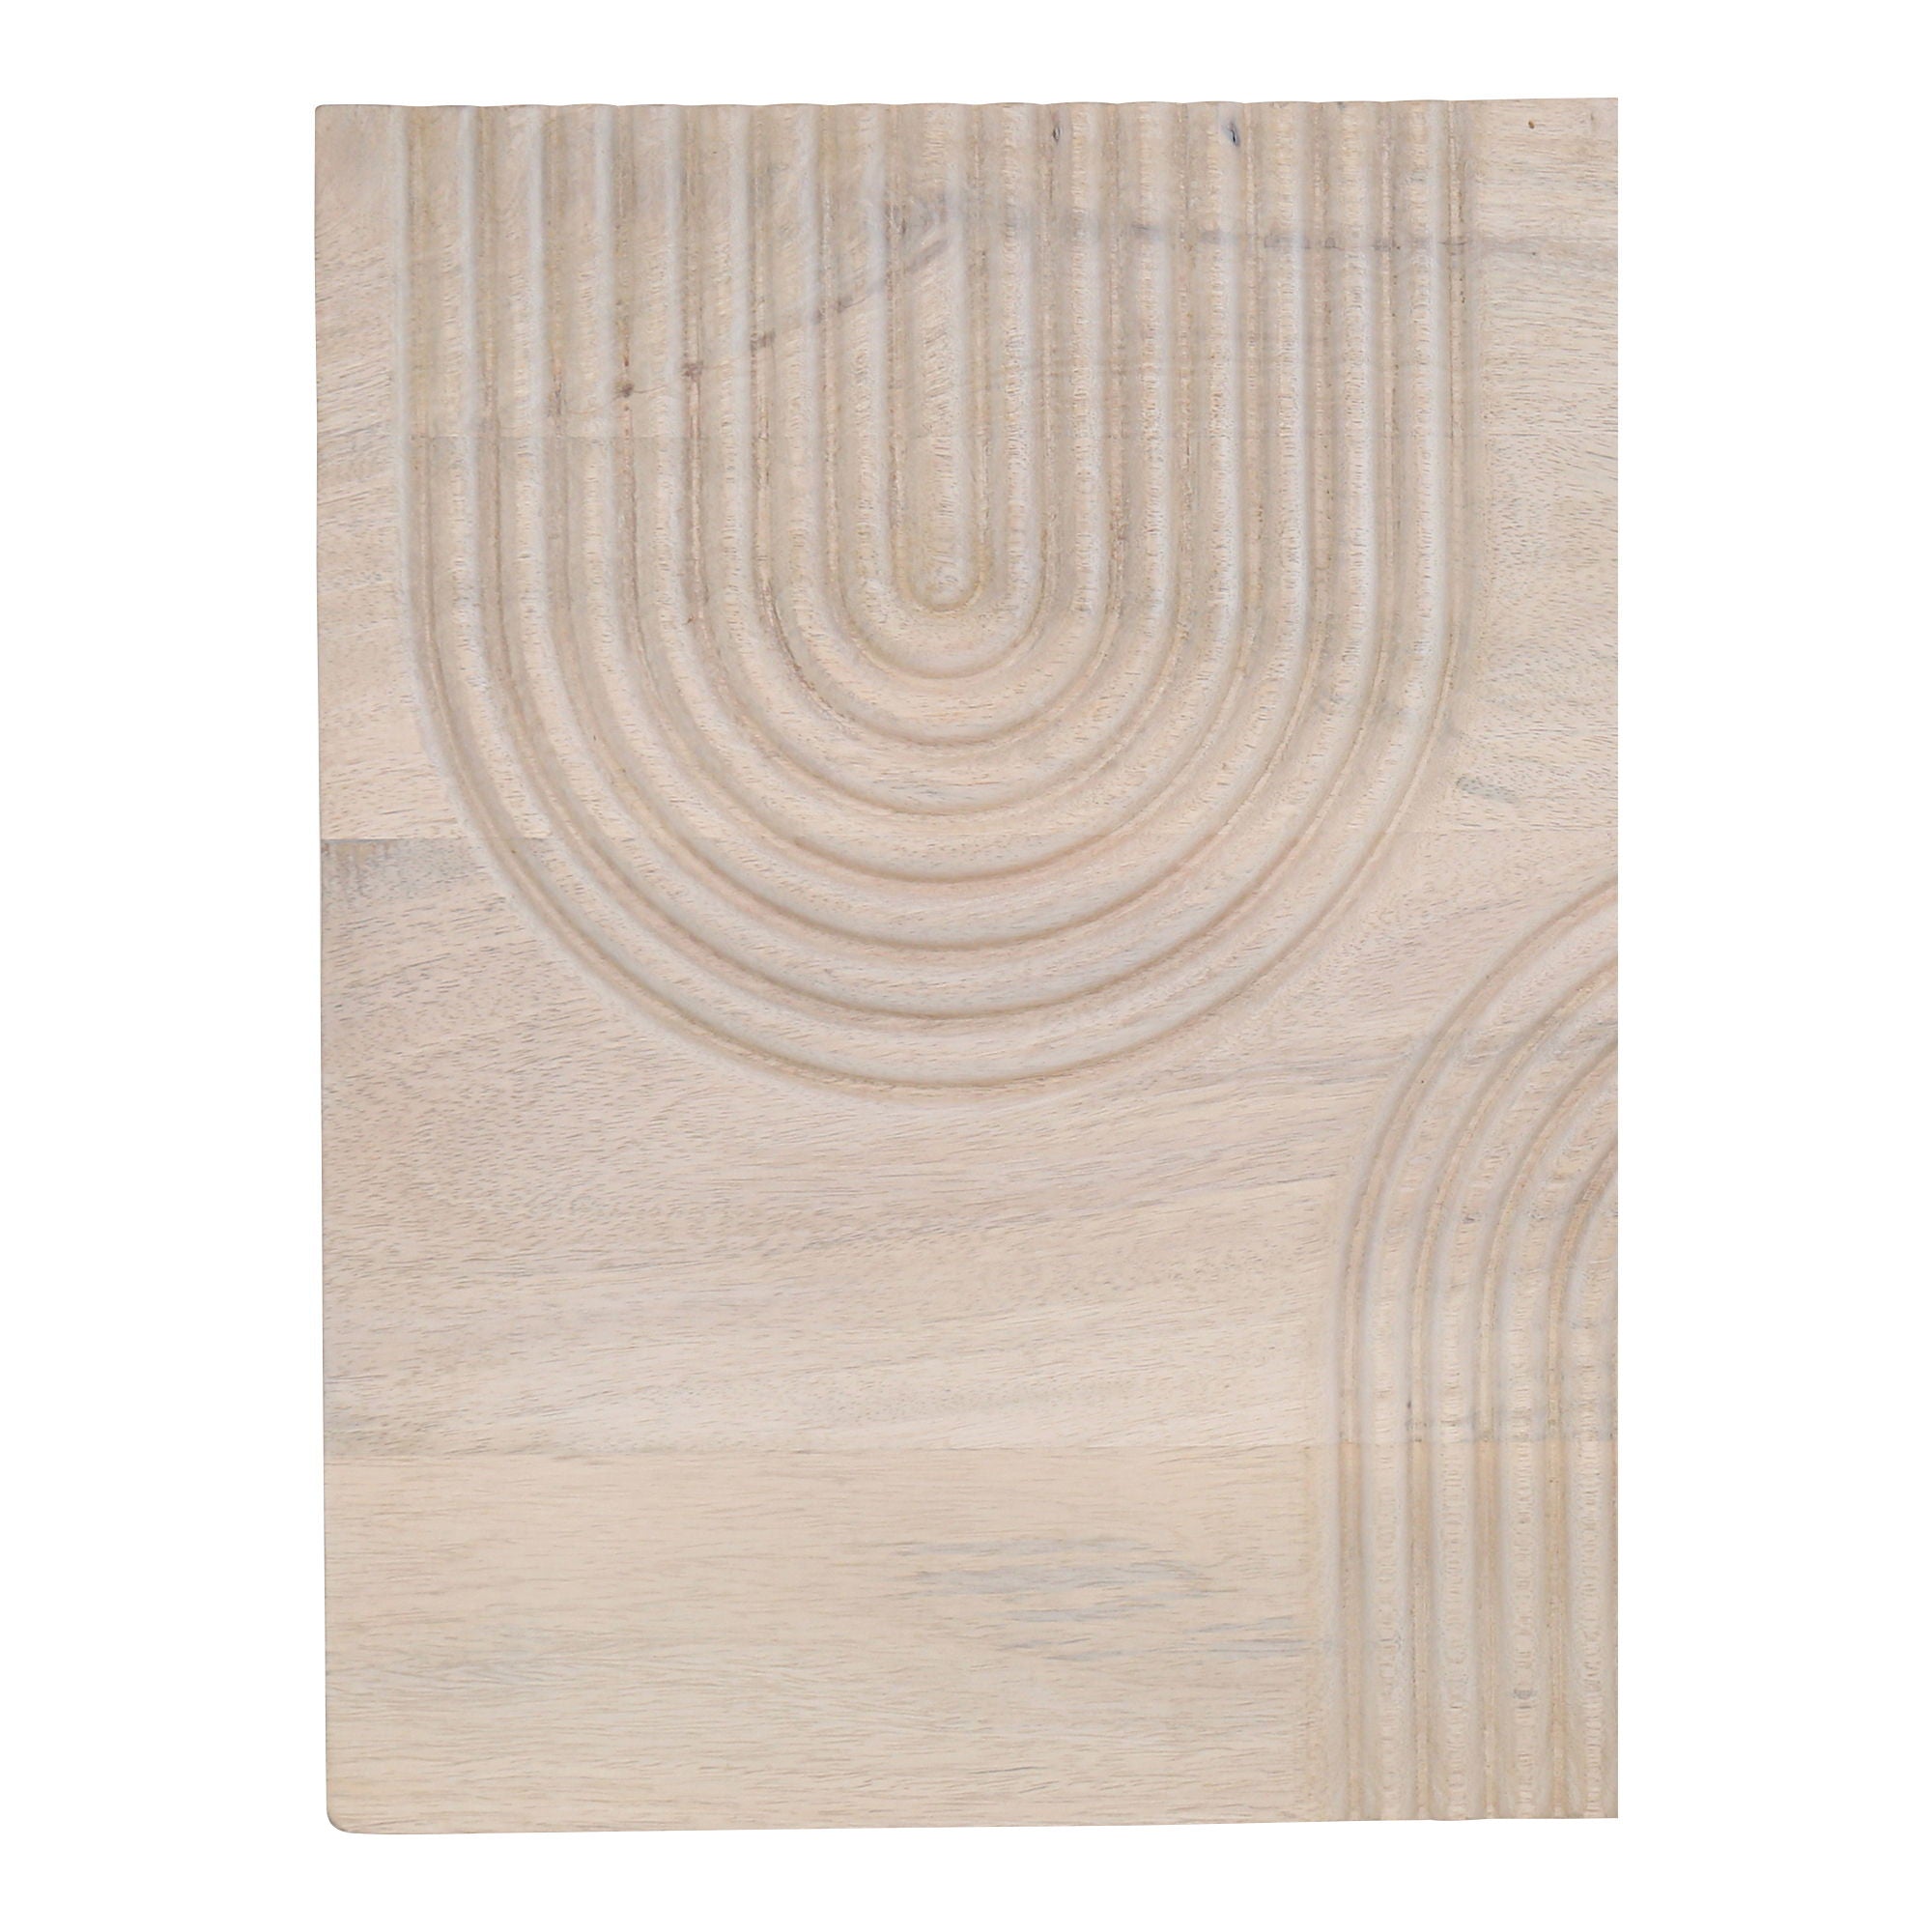 Passages - Carved Wood Wall Art - Beige